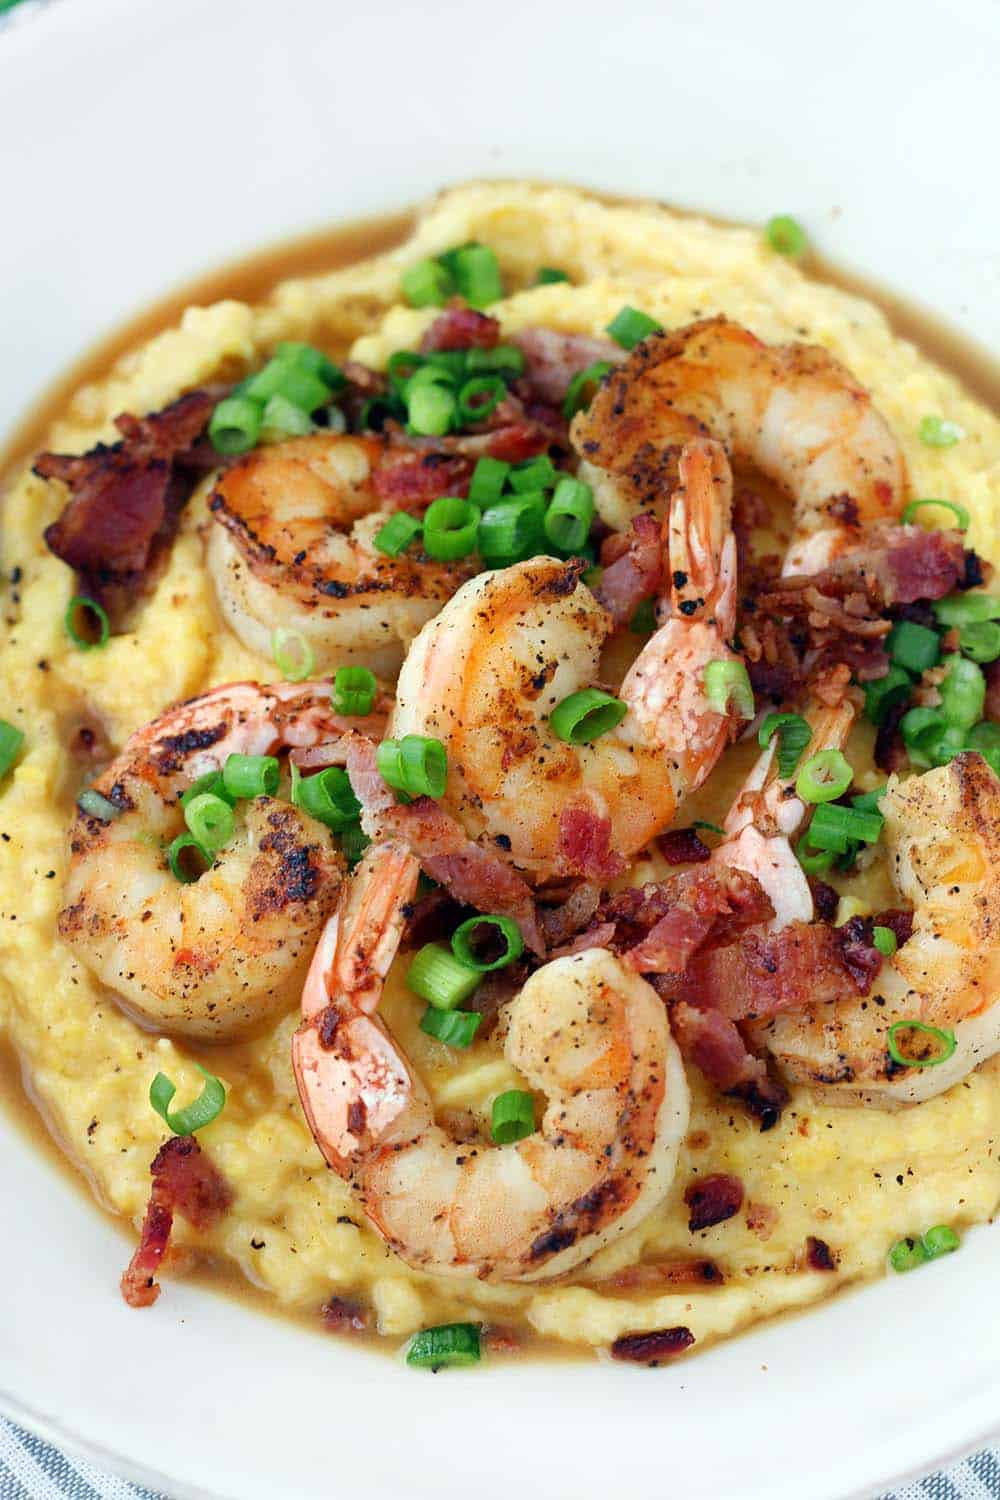 Shrimp And Grits Recipe Paula Deen
 Easy Classic Shrimp and Grits Bowl of Delicious